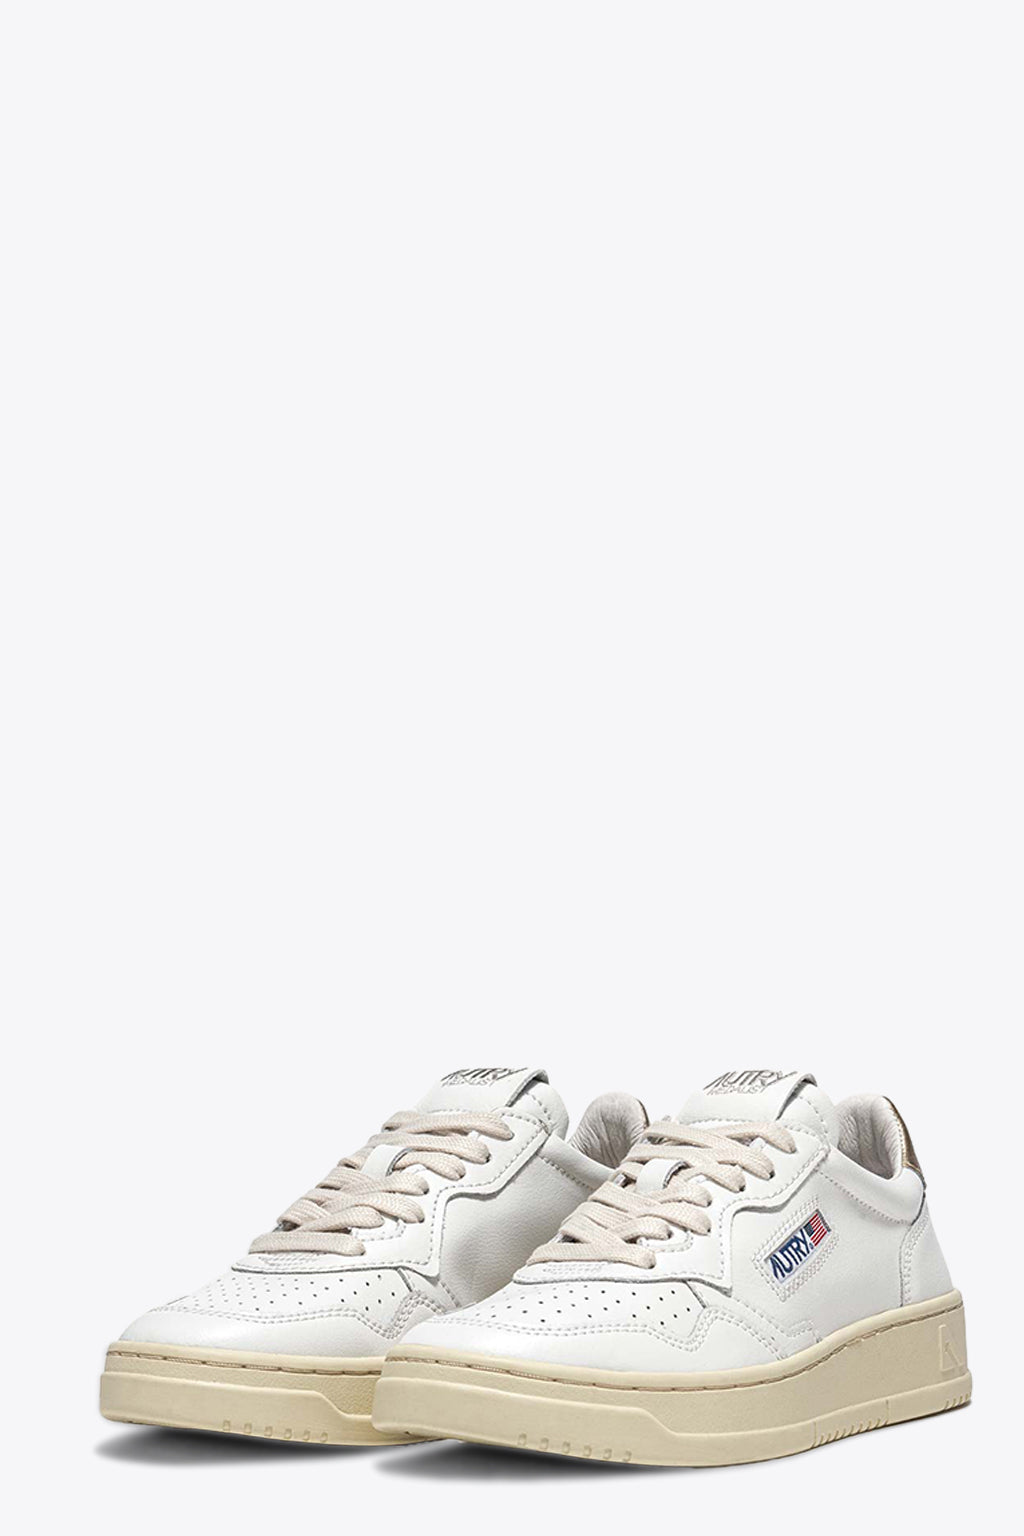 alt-image__White-leather-low-sneaker-with-gold-back-tab---Medalist